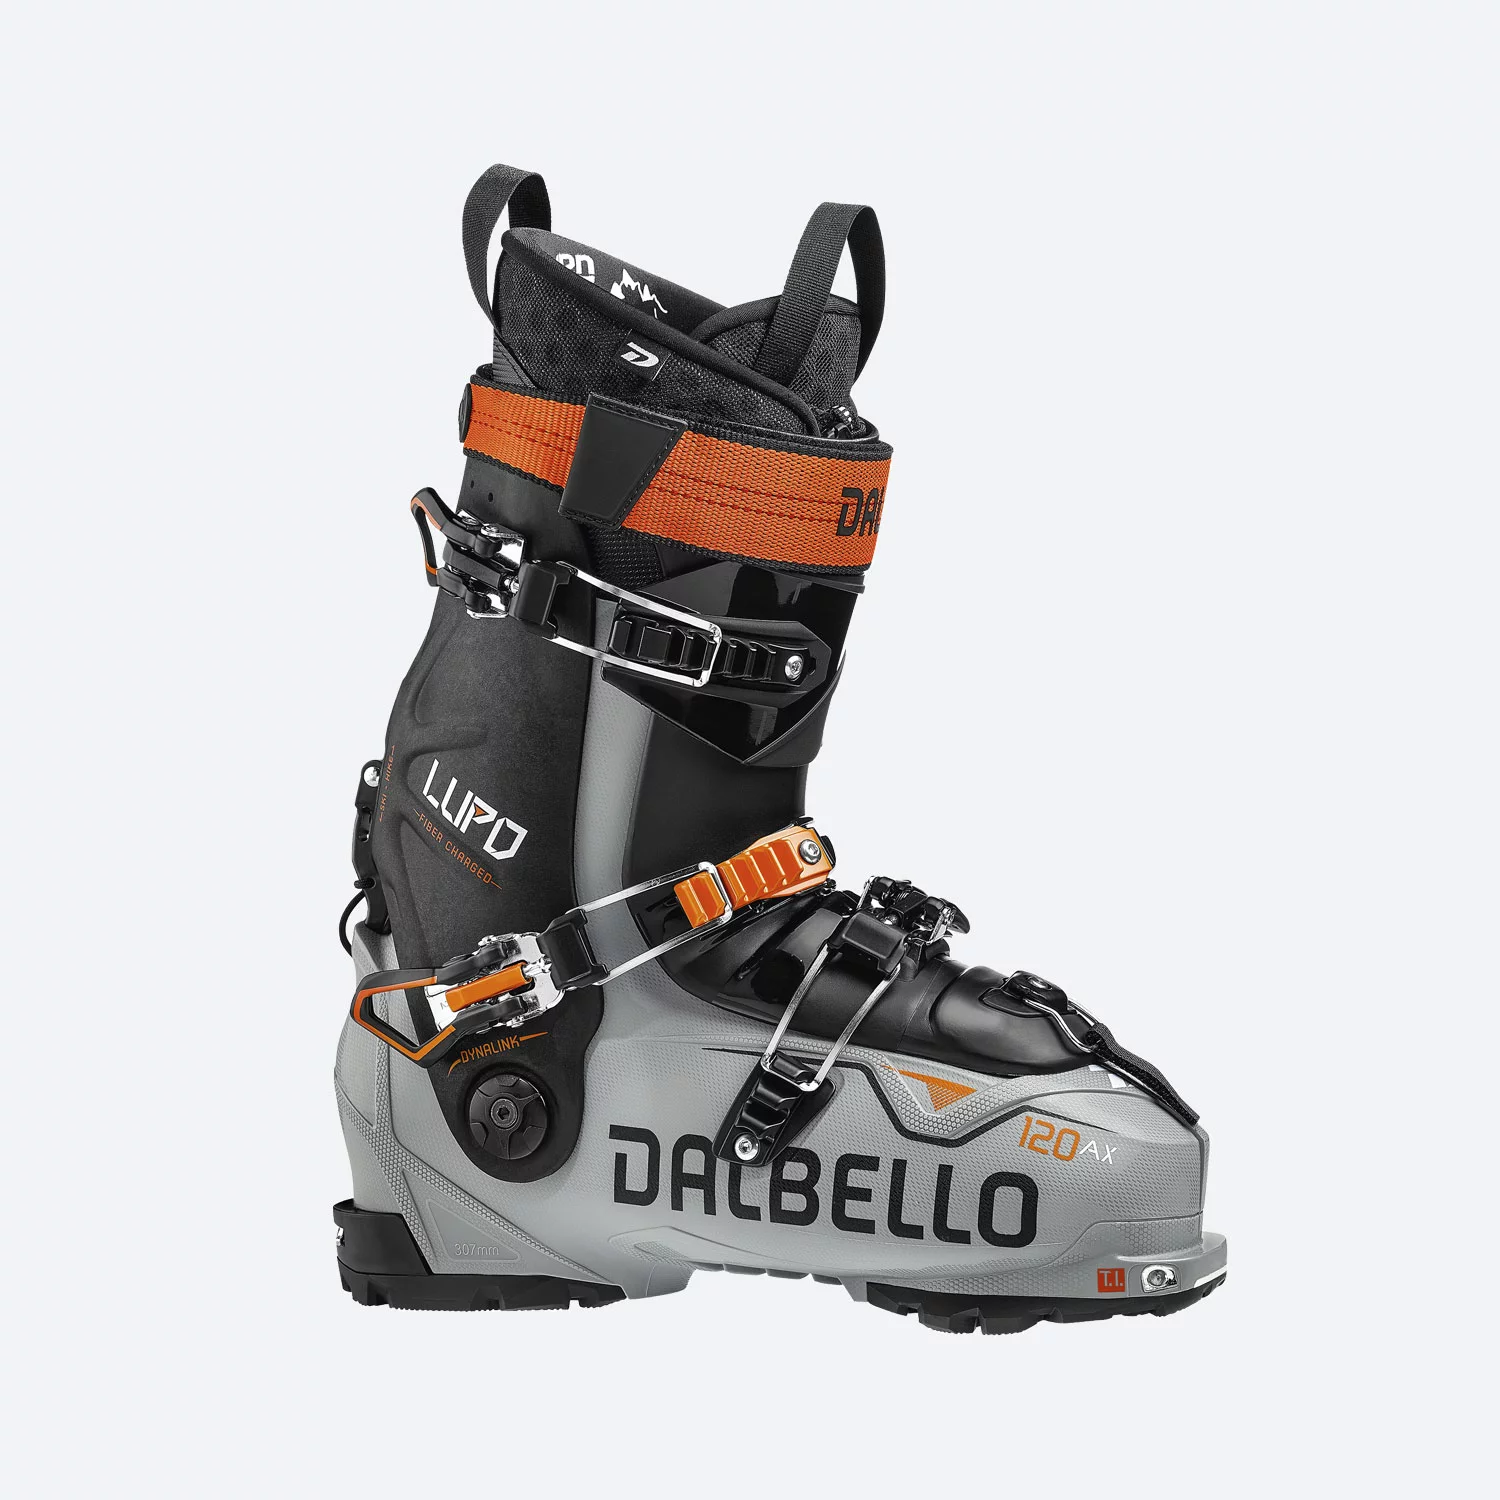 DALBELLO - LUPO AX 120 BOOTS, 275 only - 2022